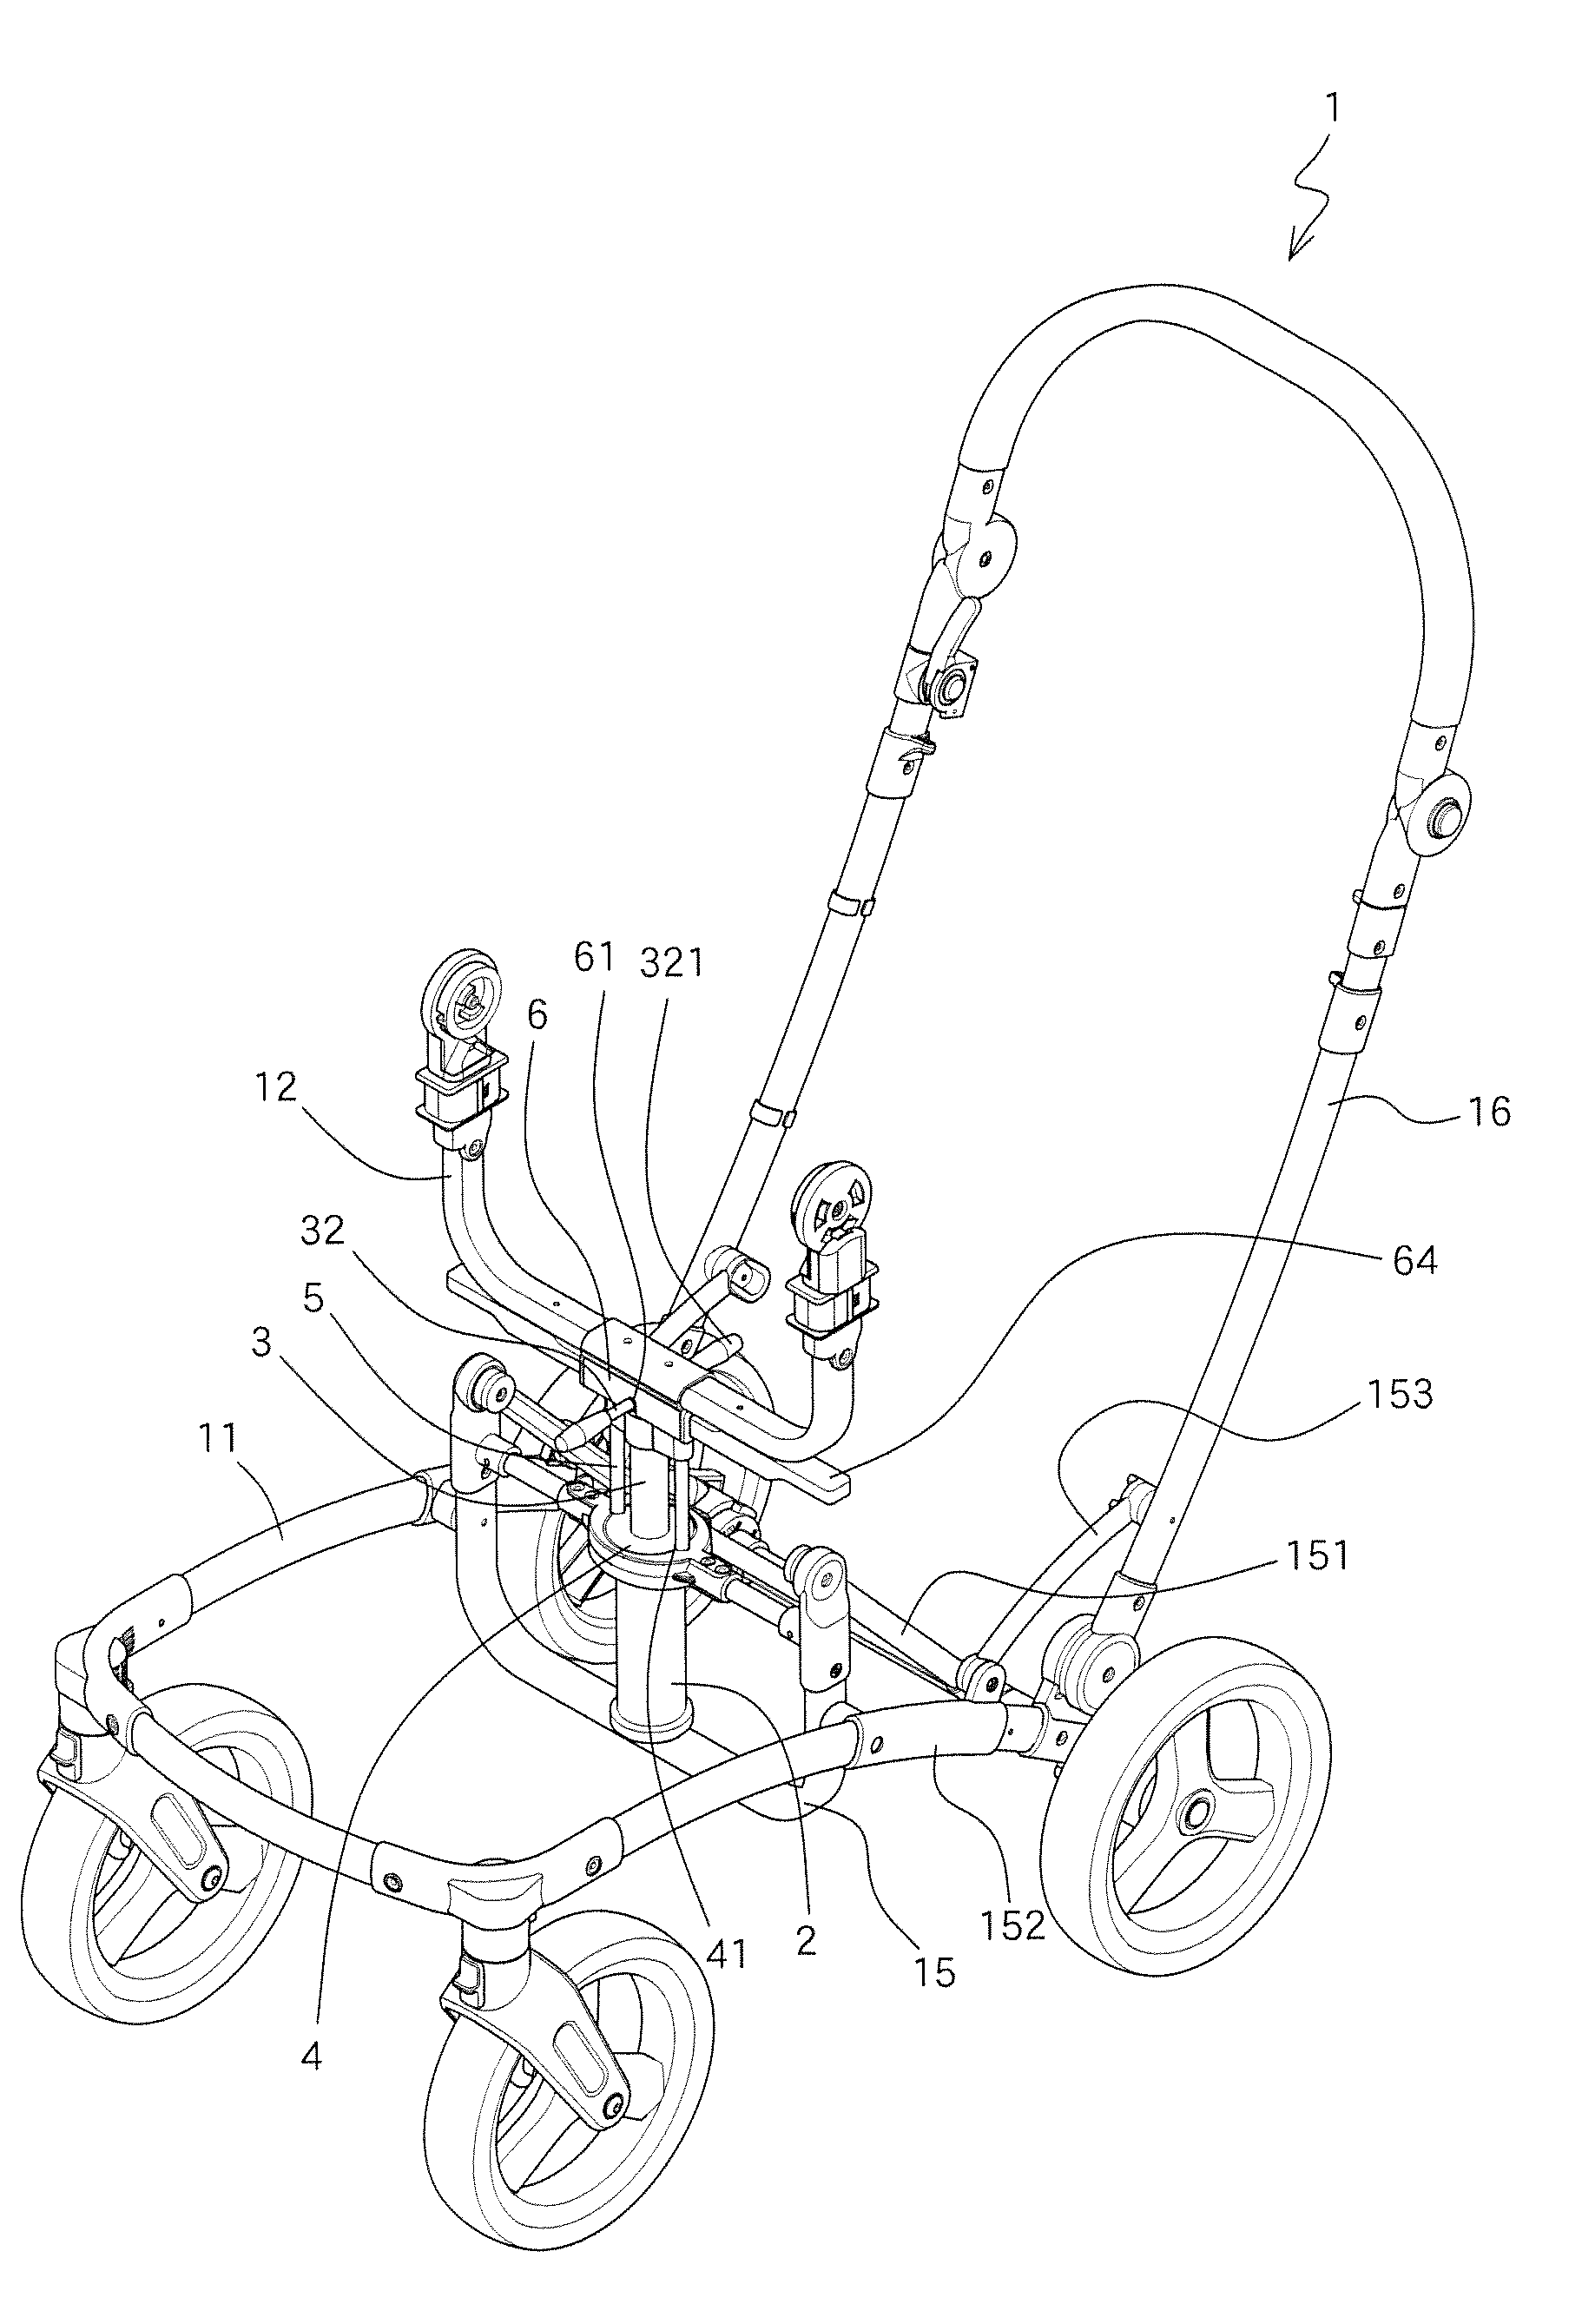 Baby stroller with a suspension unit